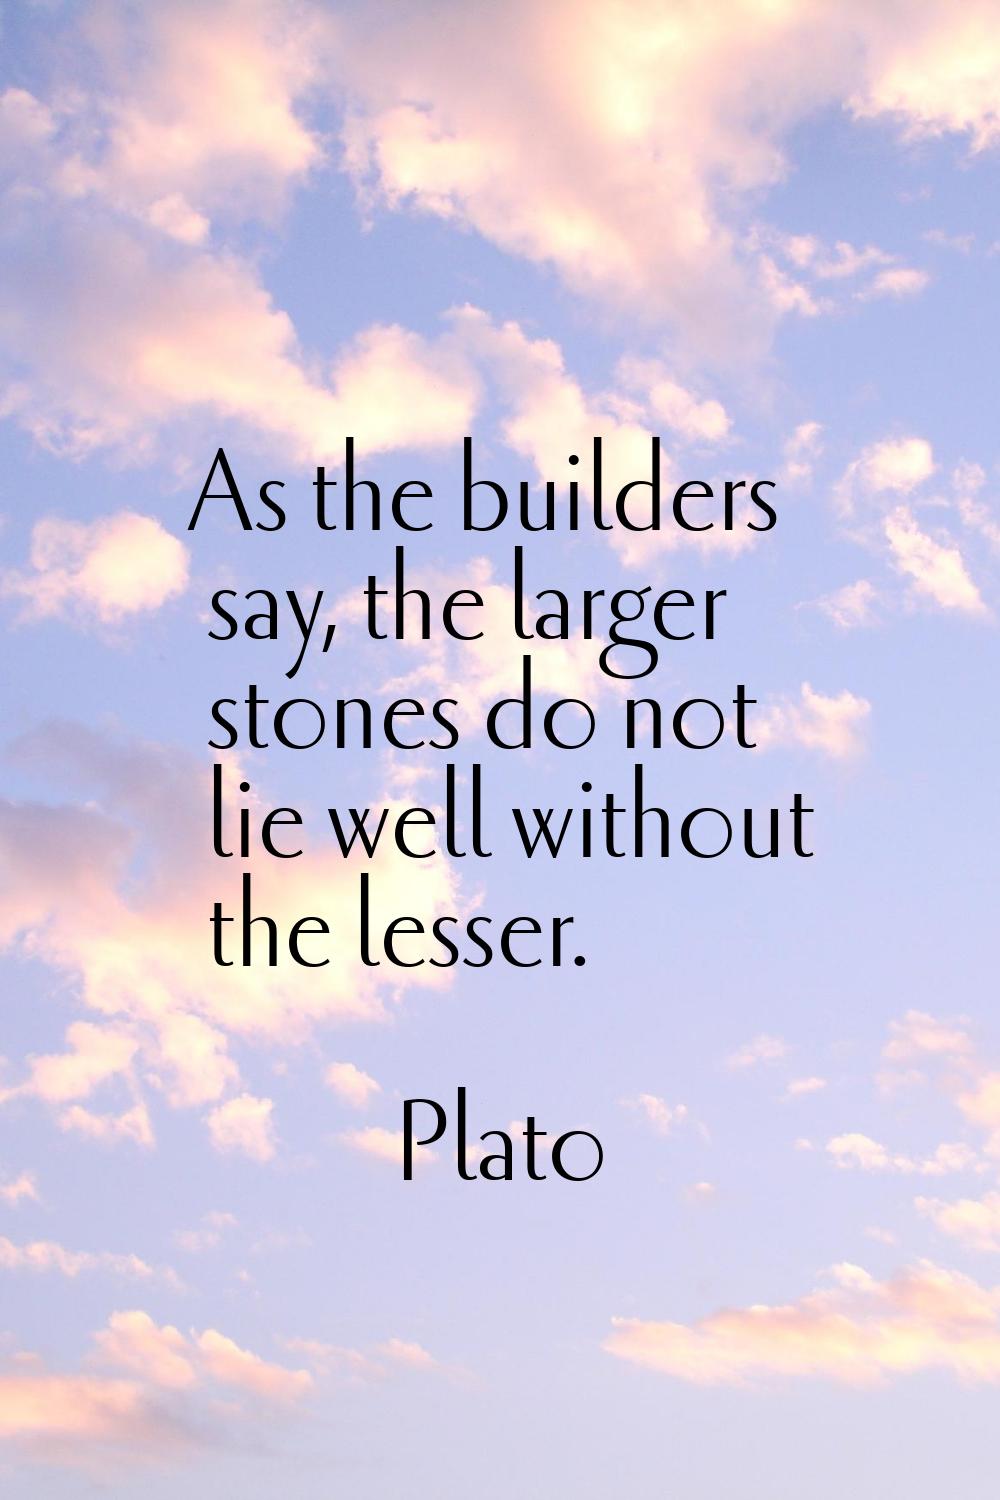 As the builders say, the larger stones do not lie well without the lesser.